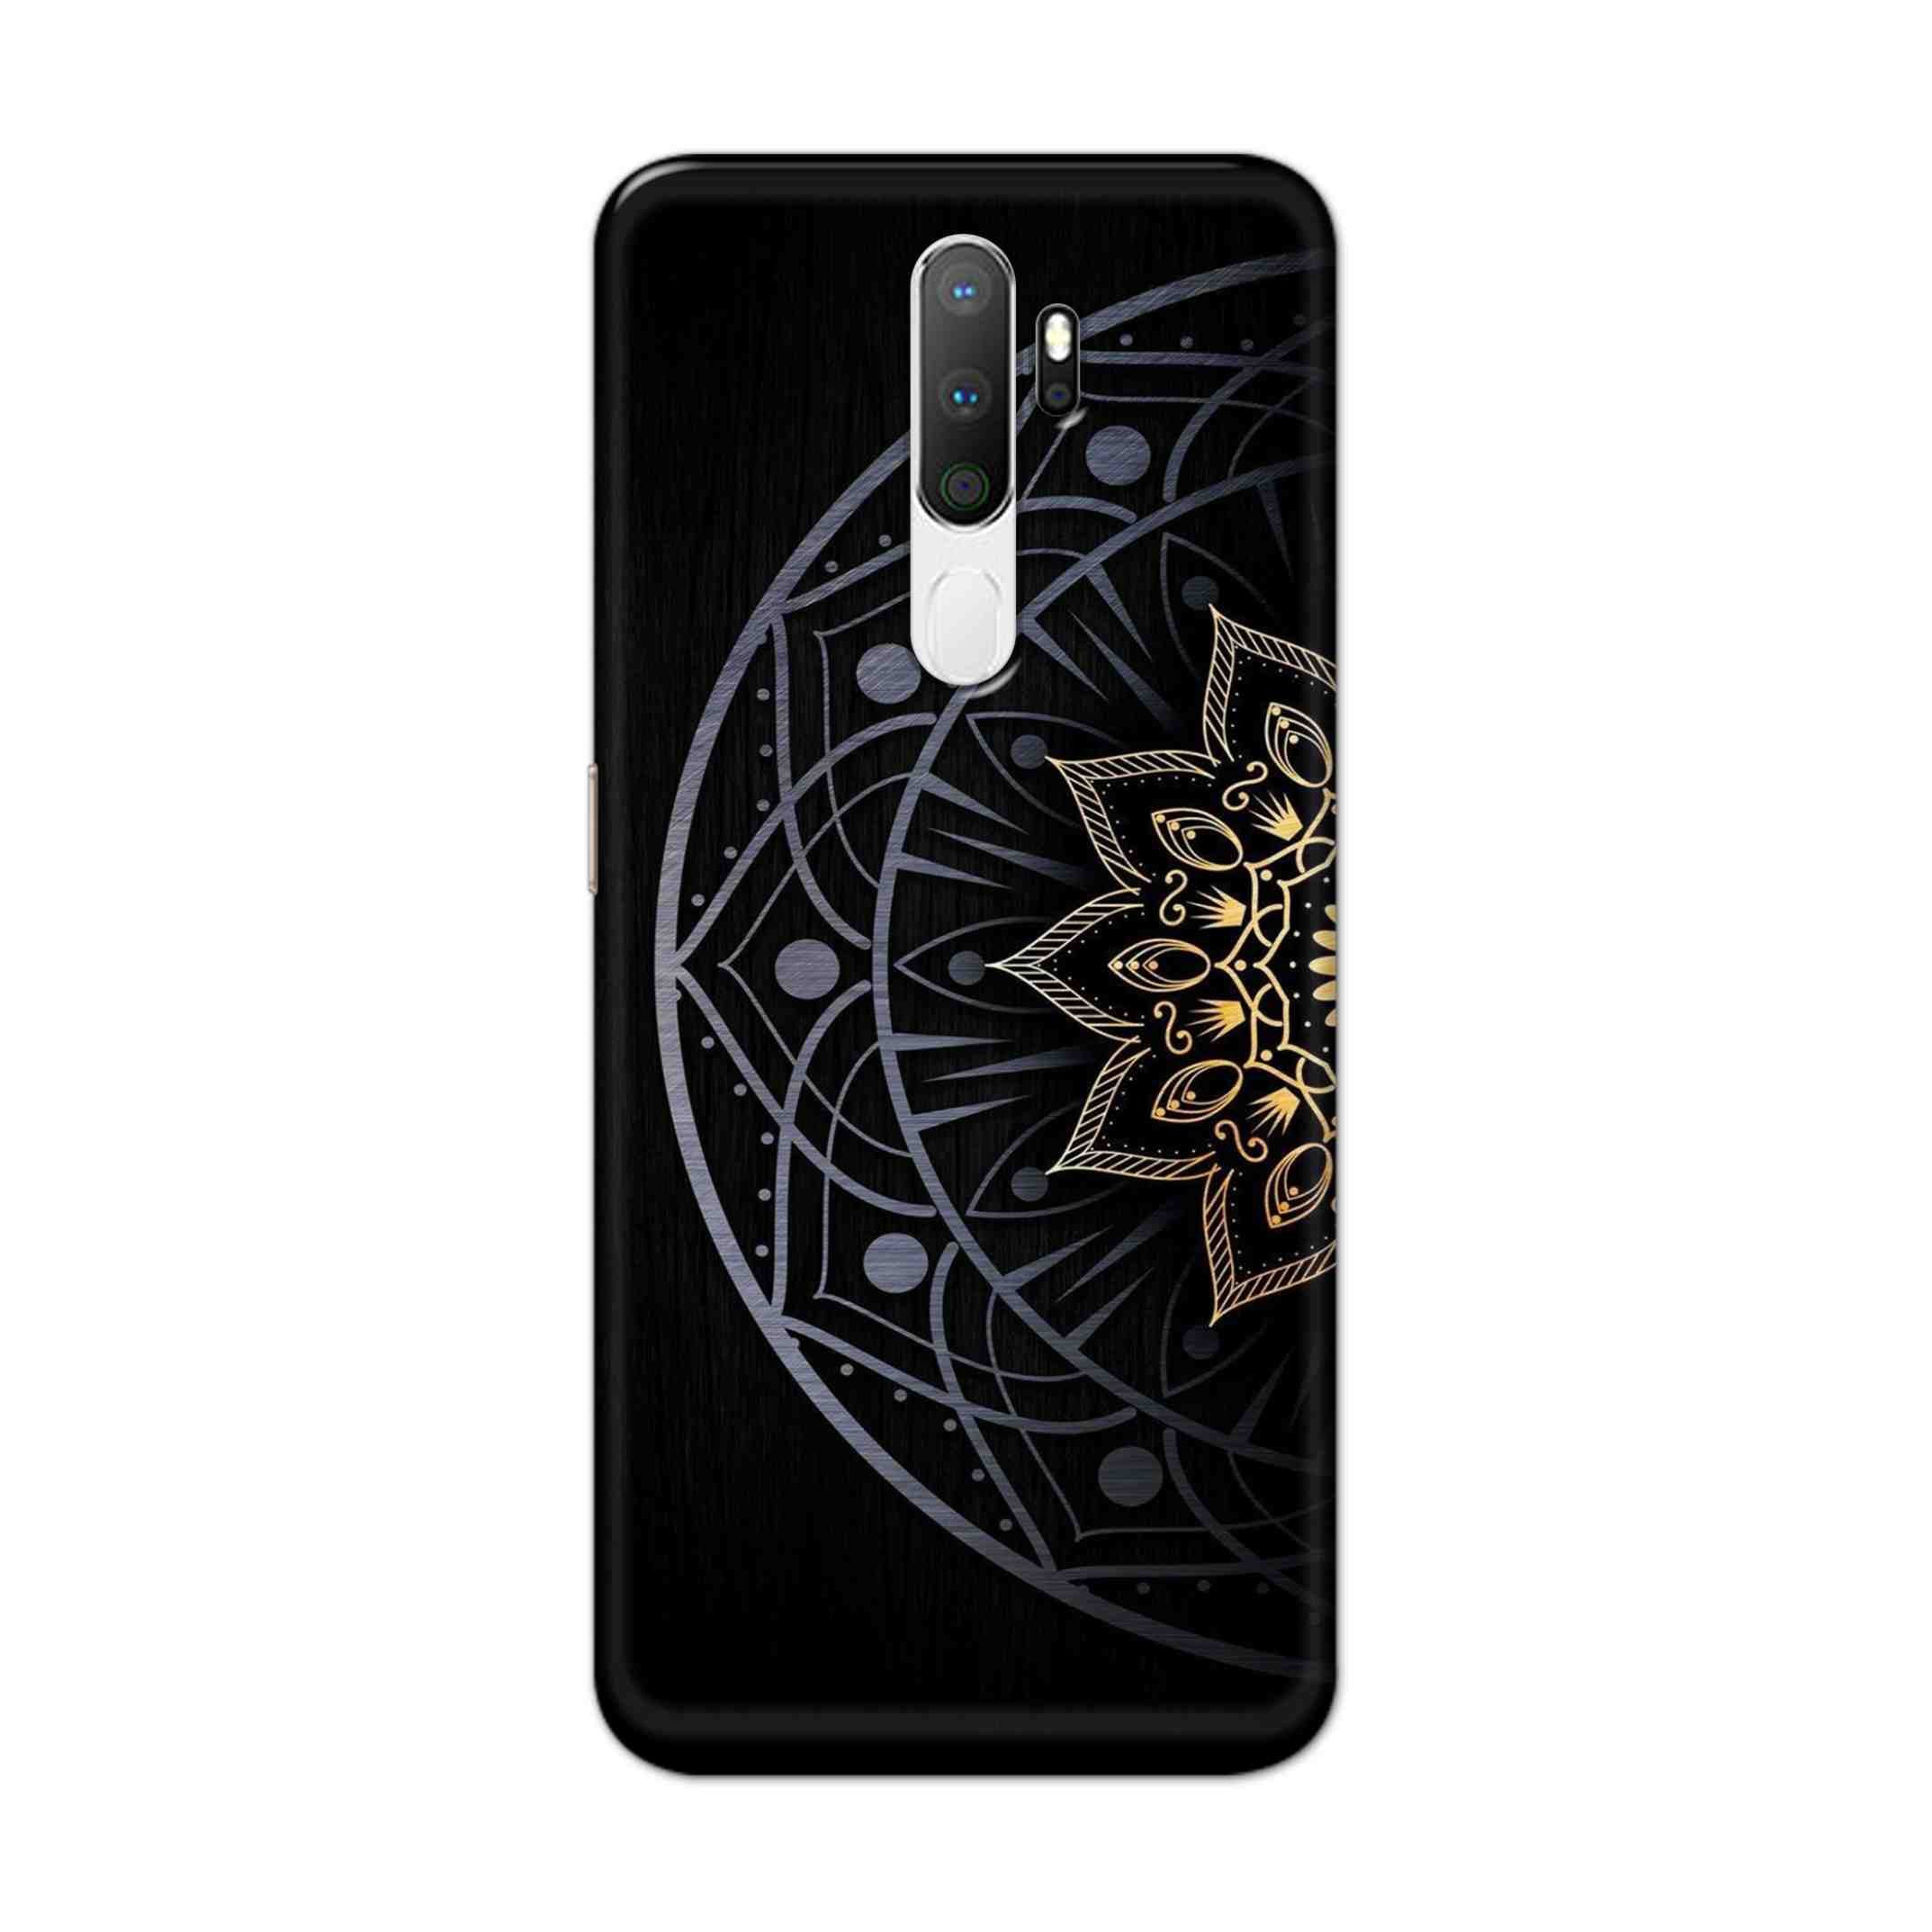 Buy Psychedelic Mandalas Hard Back Mobile Phone Case Cover For Oppo A5 (2020) Online